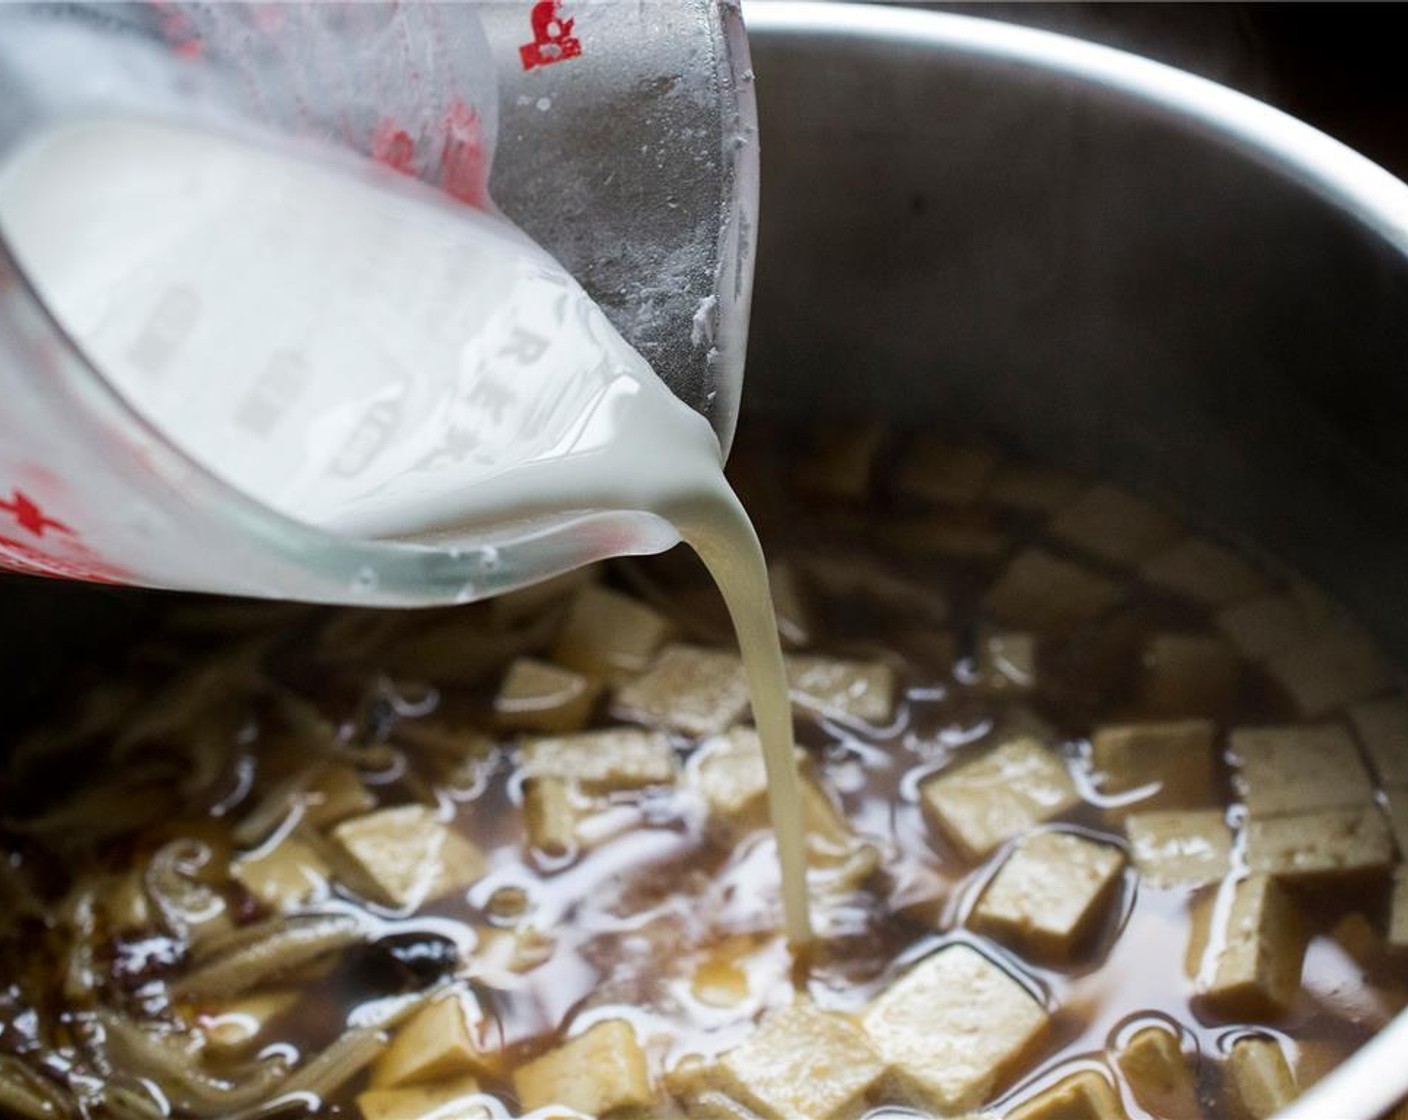 step 10 To the pot, add Sesame Oil (1/2 Tbsp), pork loin, Bamboo Shoots (1 1/2 cups), Enoki Mushroom (1/2 cup), shiitake mushrooms, and wood ear mushrooms. Bring to a boil and then reduce to a simmer.